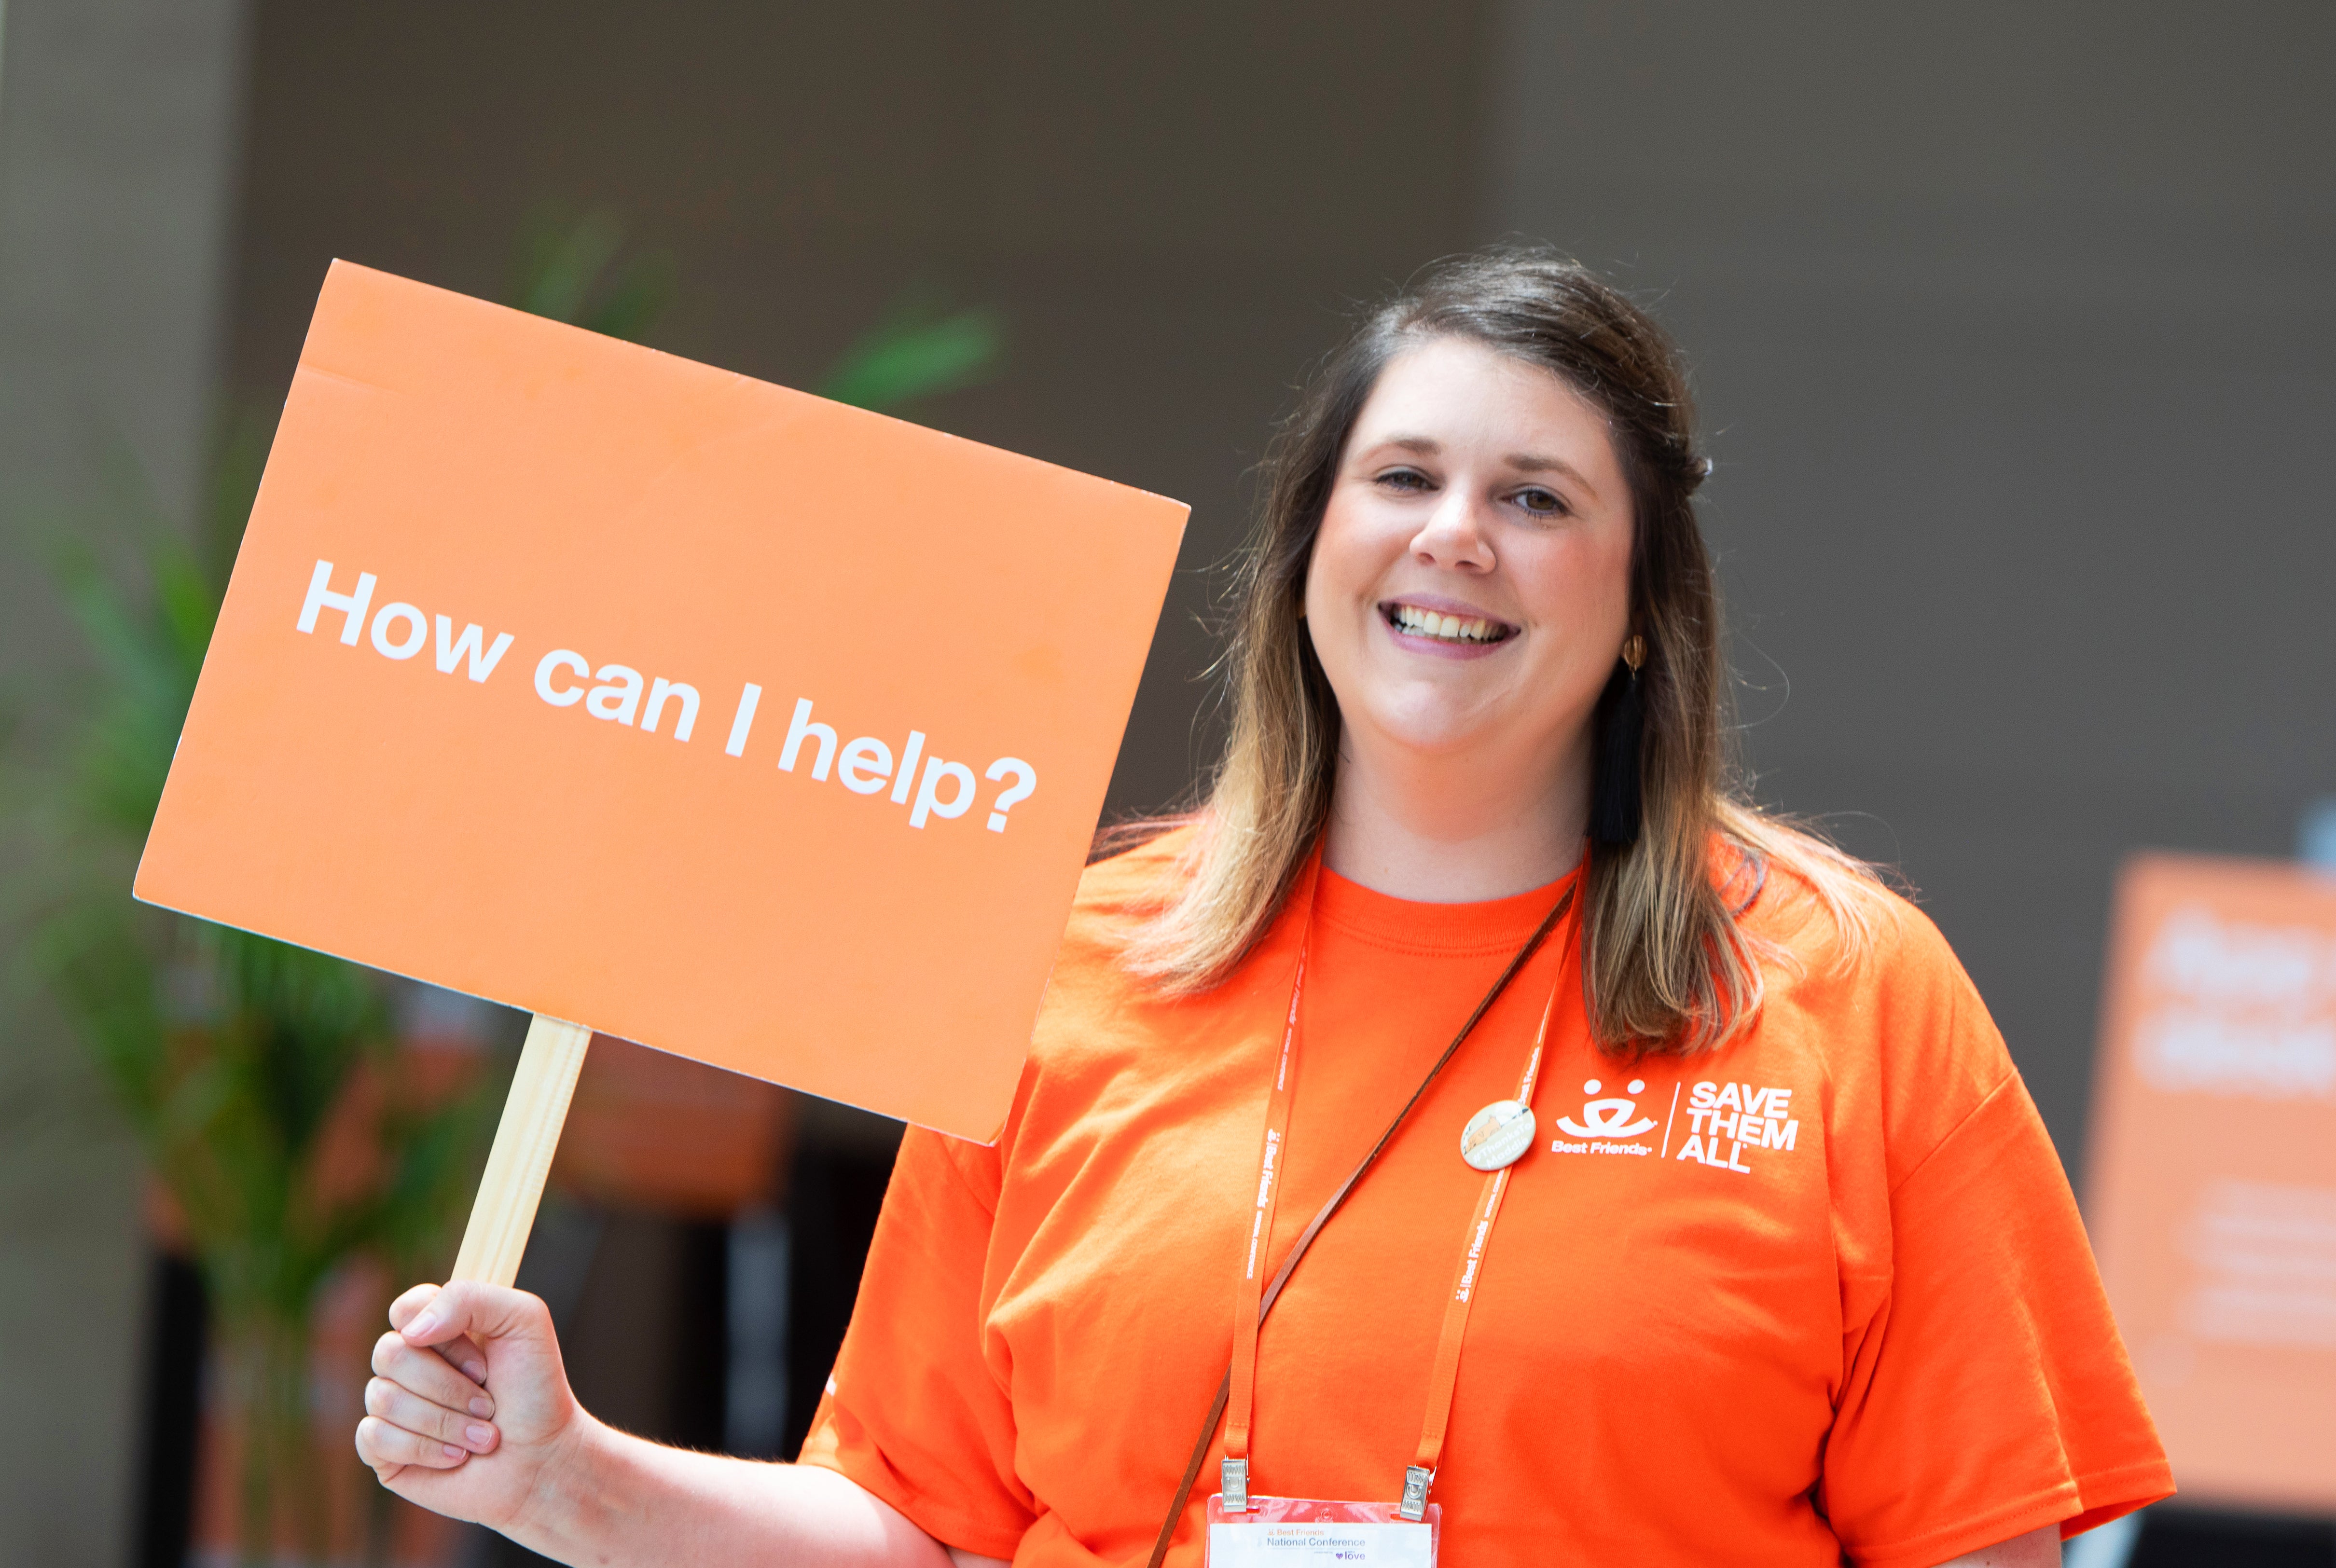 Smiling volunteer holding a "How can I help?" sign